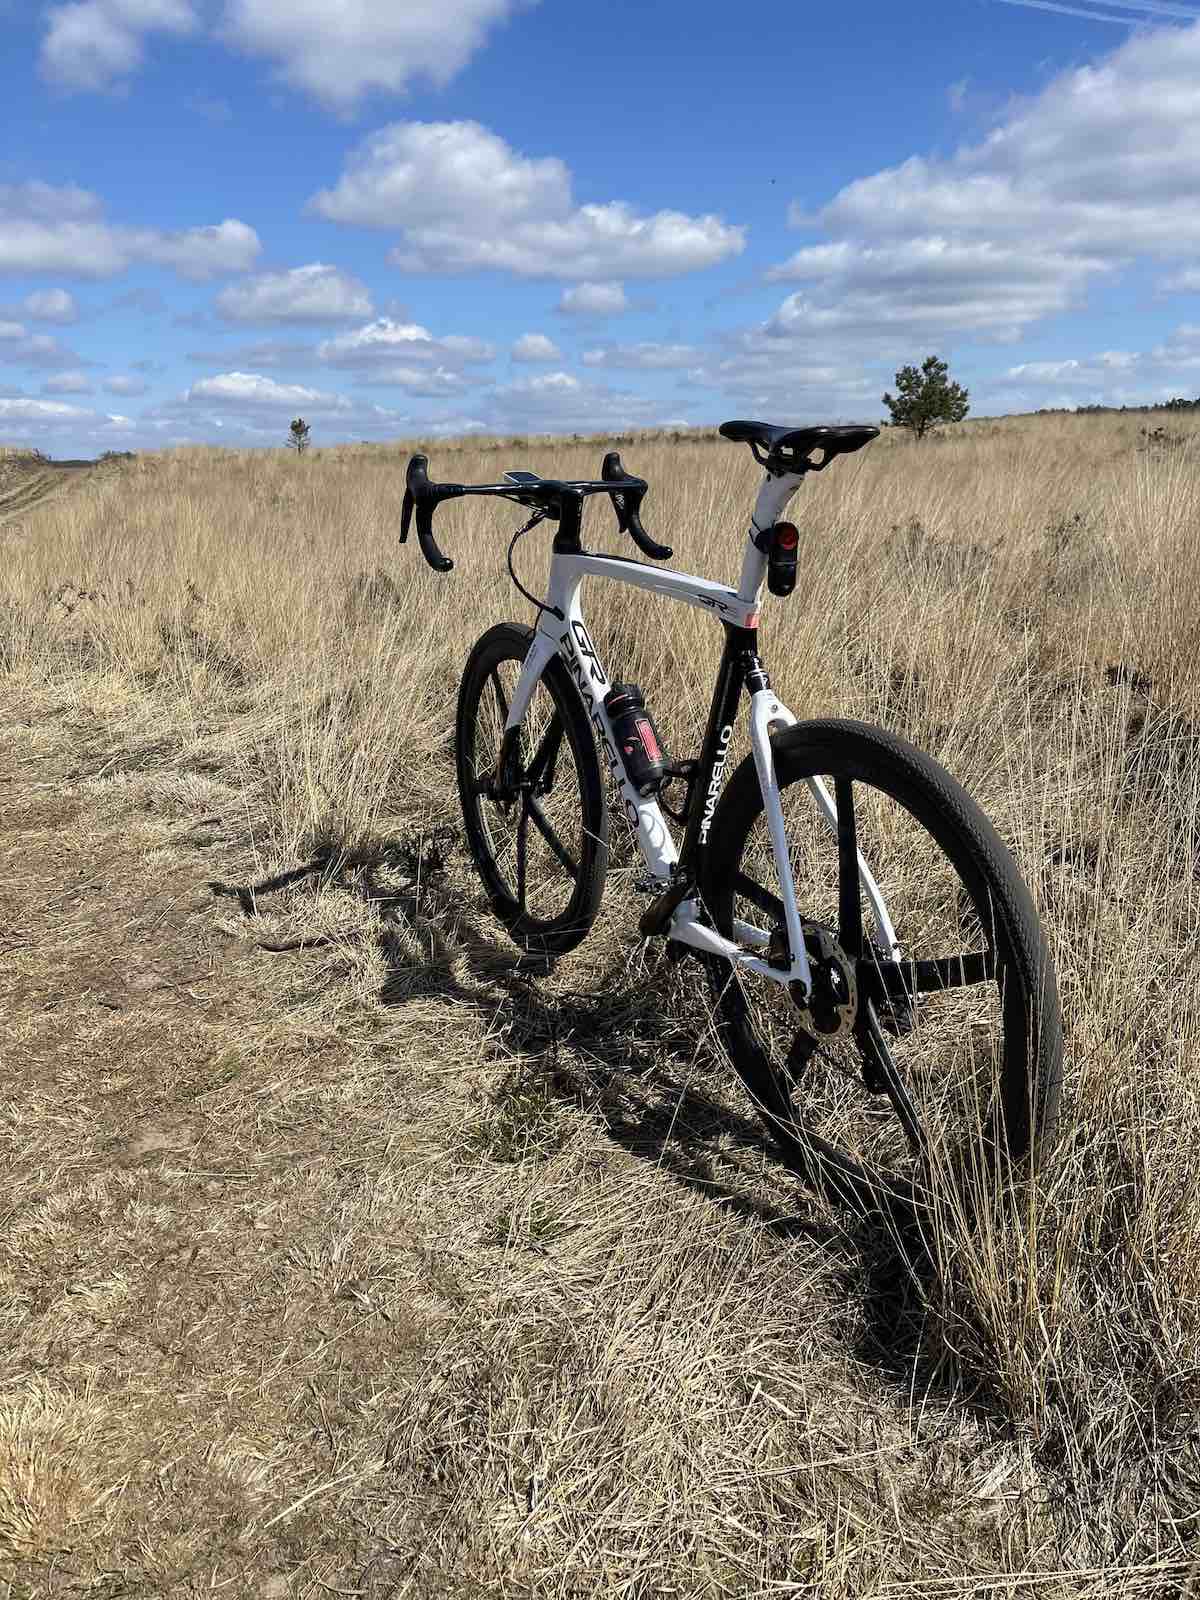 bikerumor pic of the day a pinarello bicycle is on a gravel path amidst golden grassy field with a blue sky dotted with fluffy white clouds in the Loenermark on the dutch veluwe.